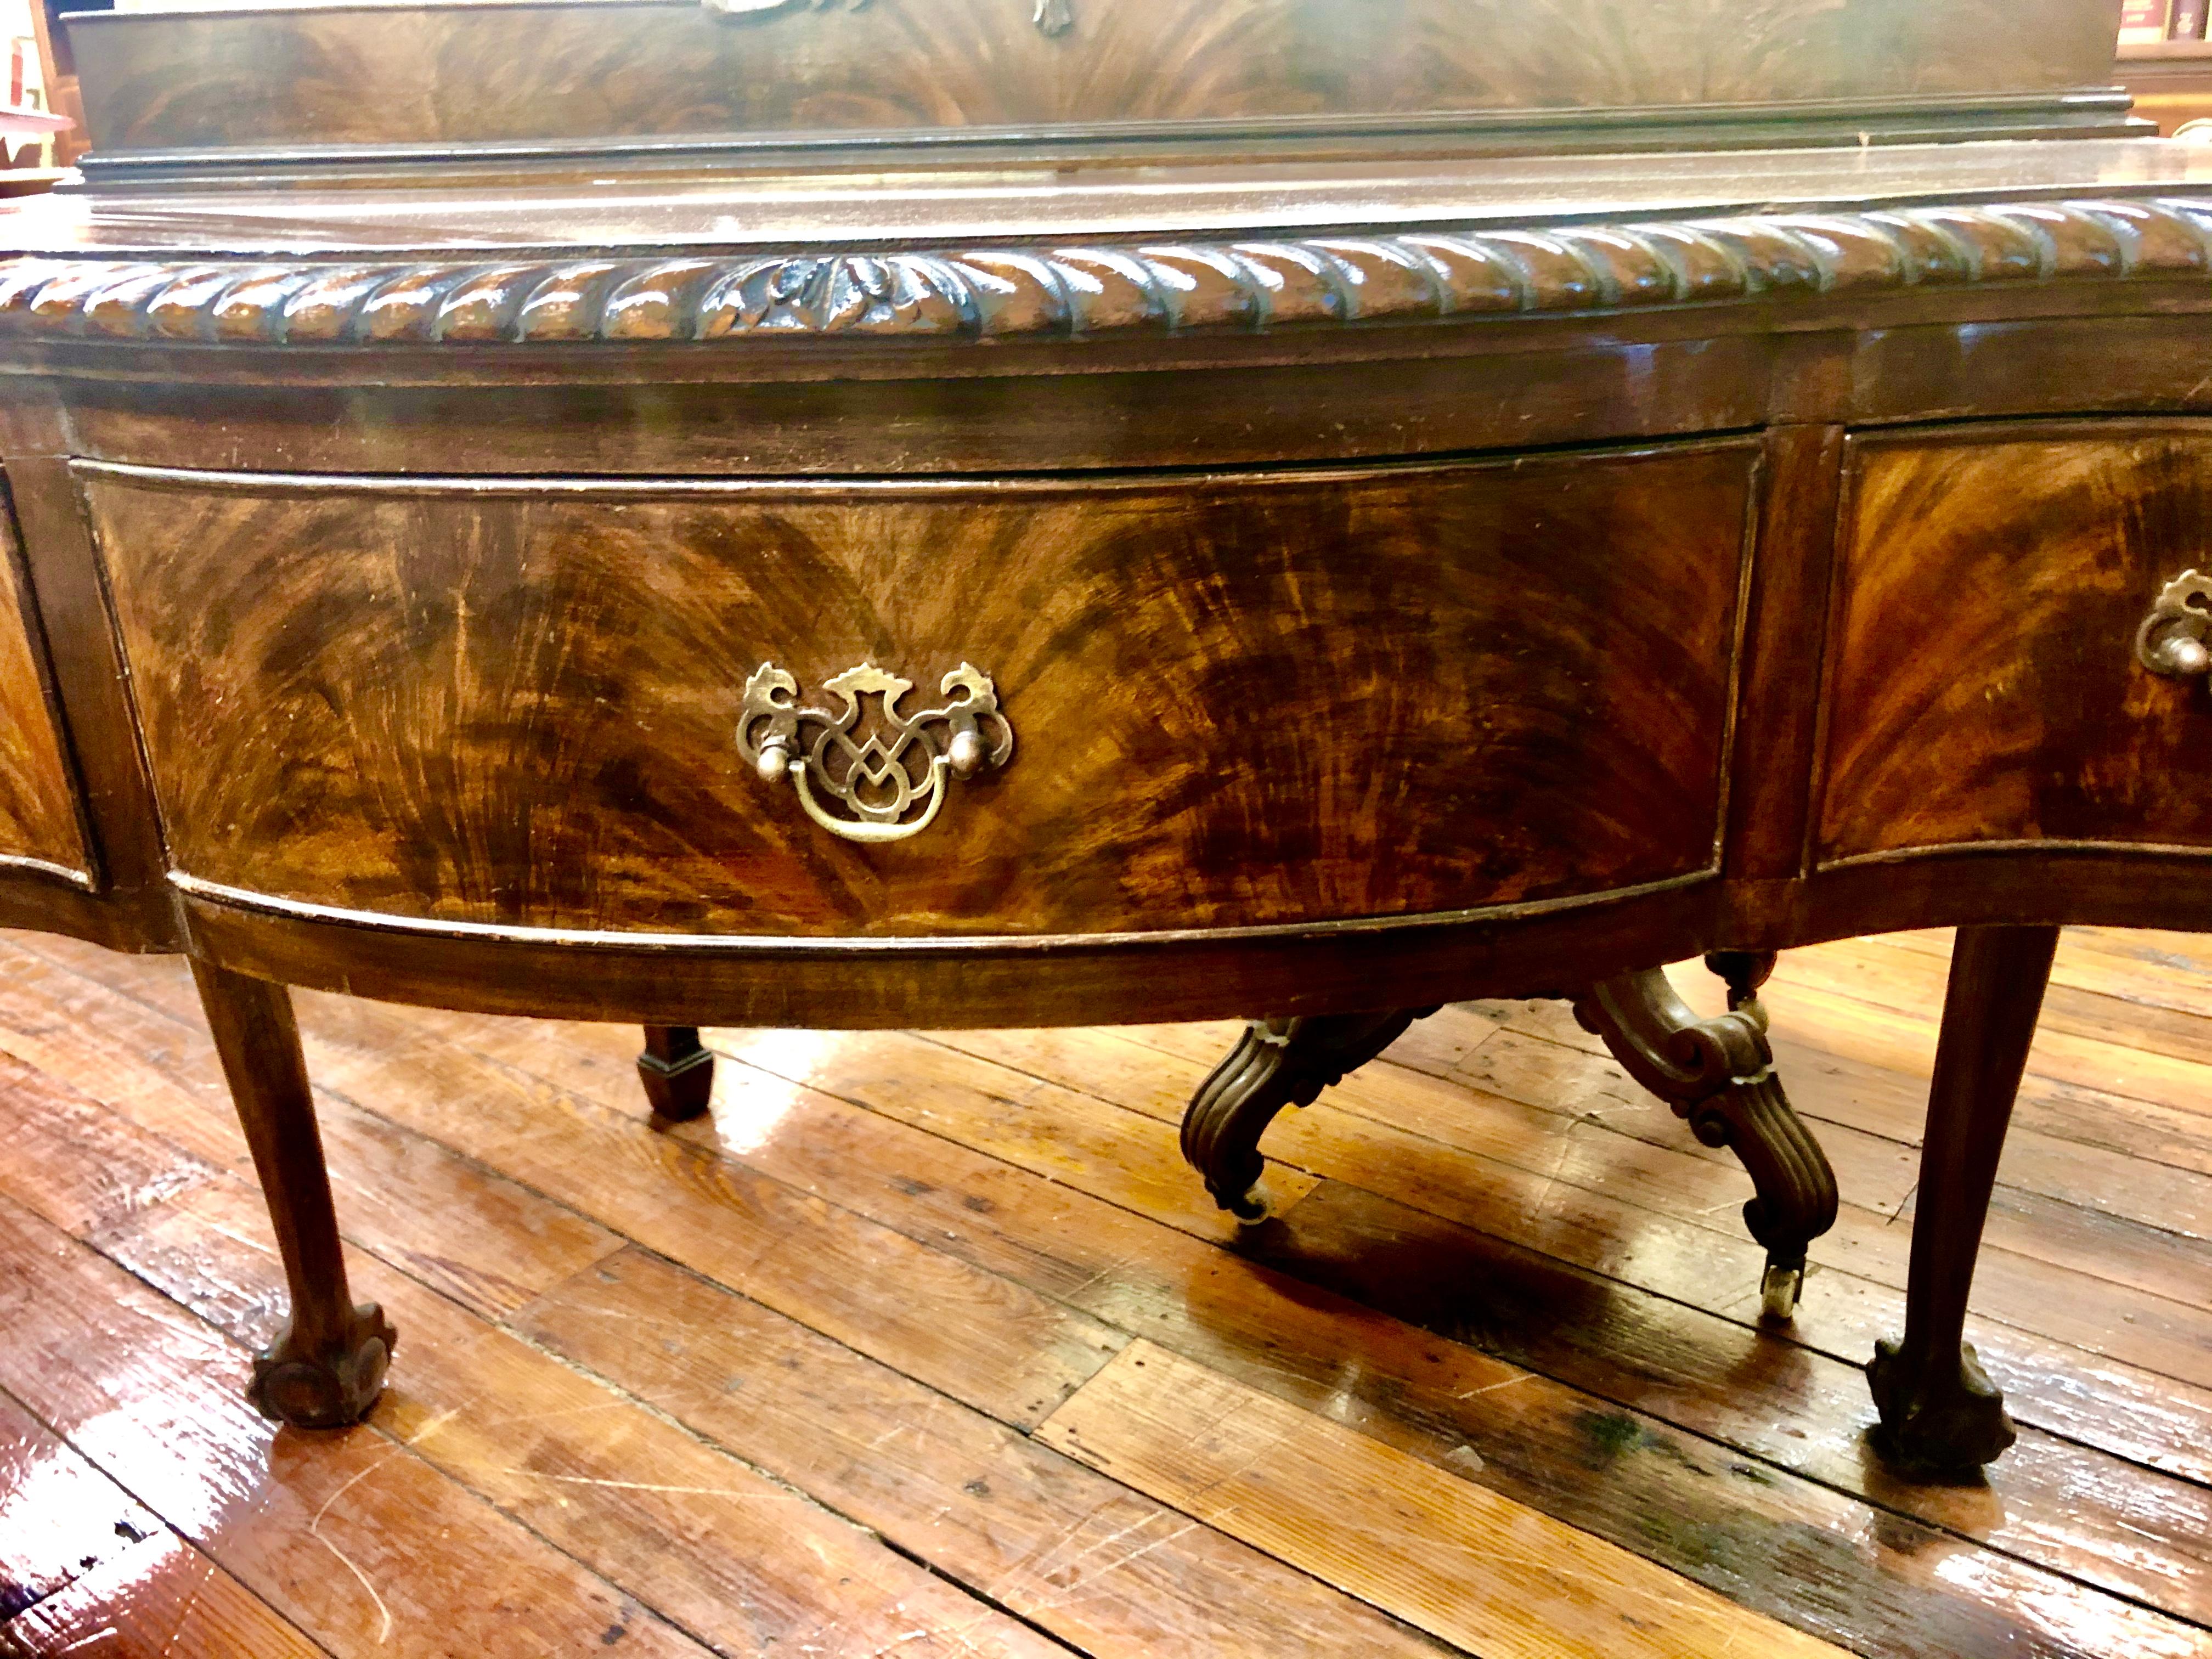 Fine quality antique English Chippendale style (Chippendale revival) hand carved solid mahogany serpentine fronted small hunt-board or server. Please note handsome hand carved gadroon edge, acanthus leaf knees and ball and claw feet. Drawers lined